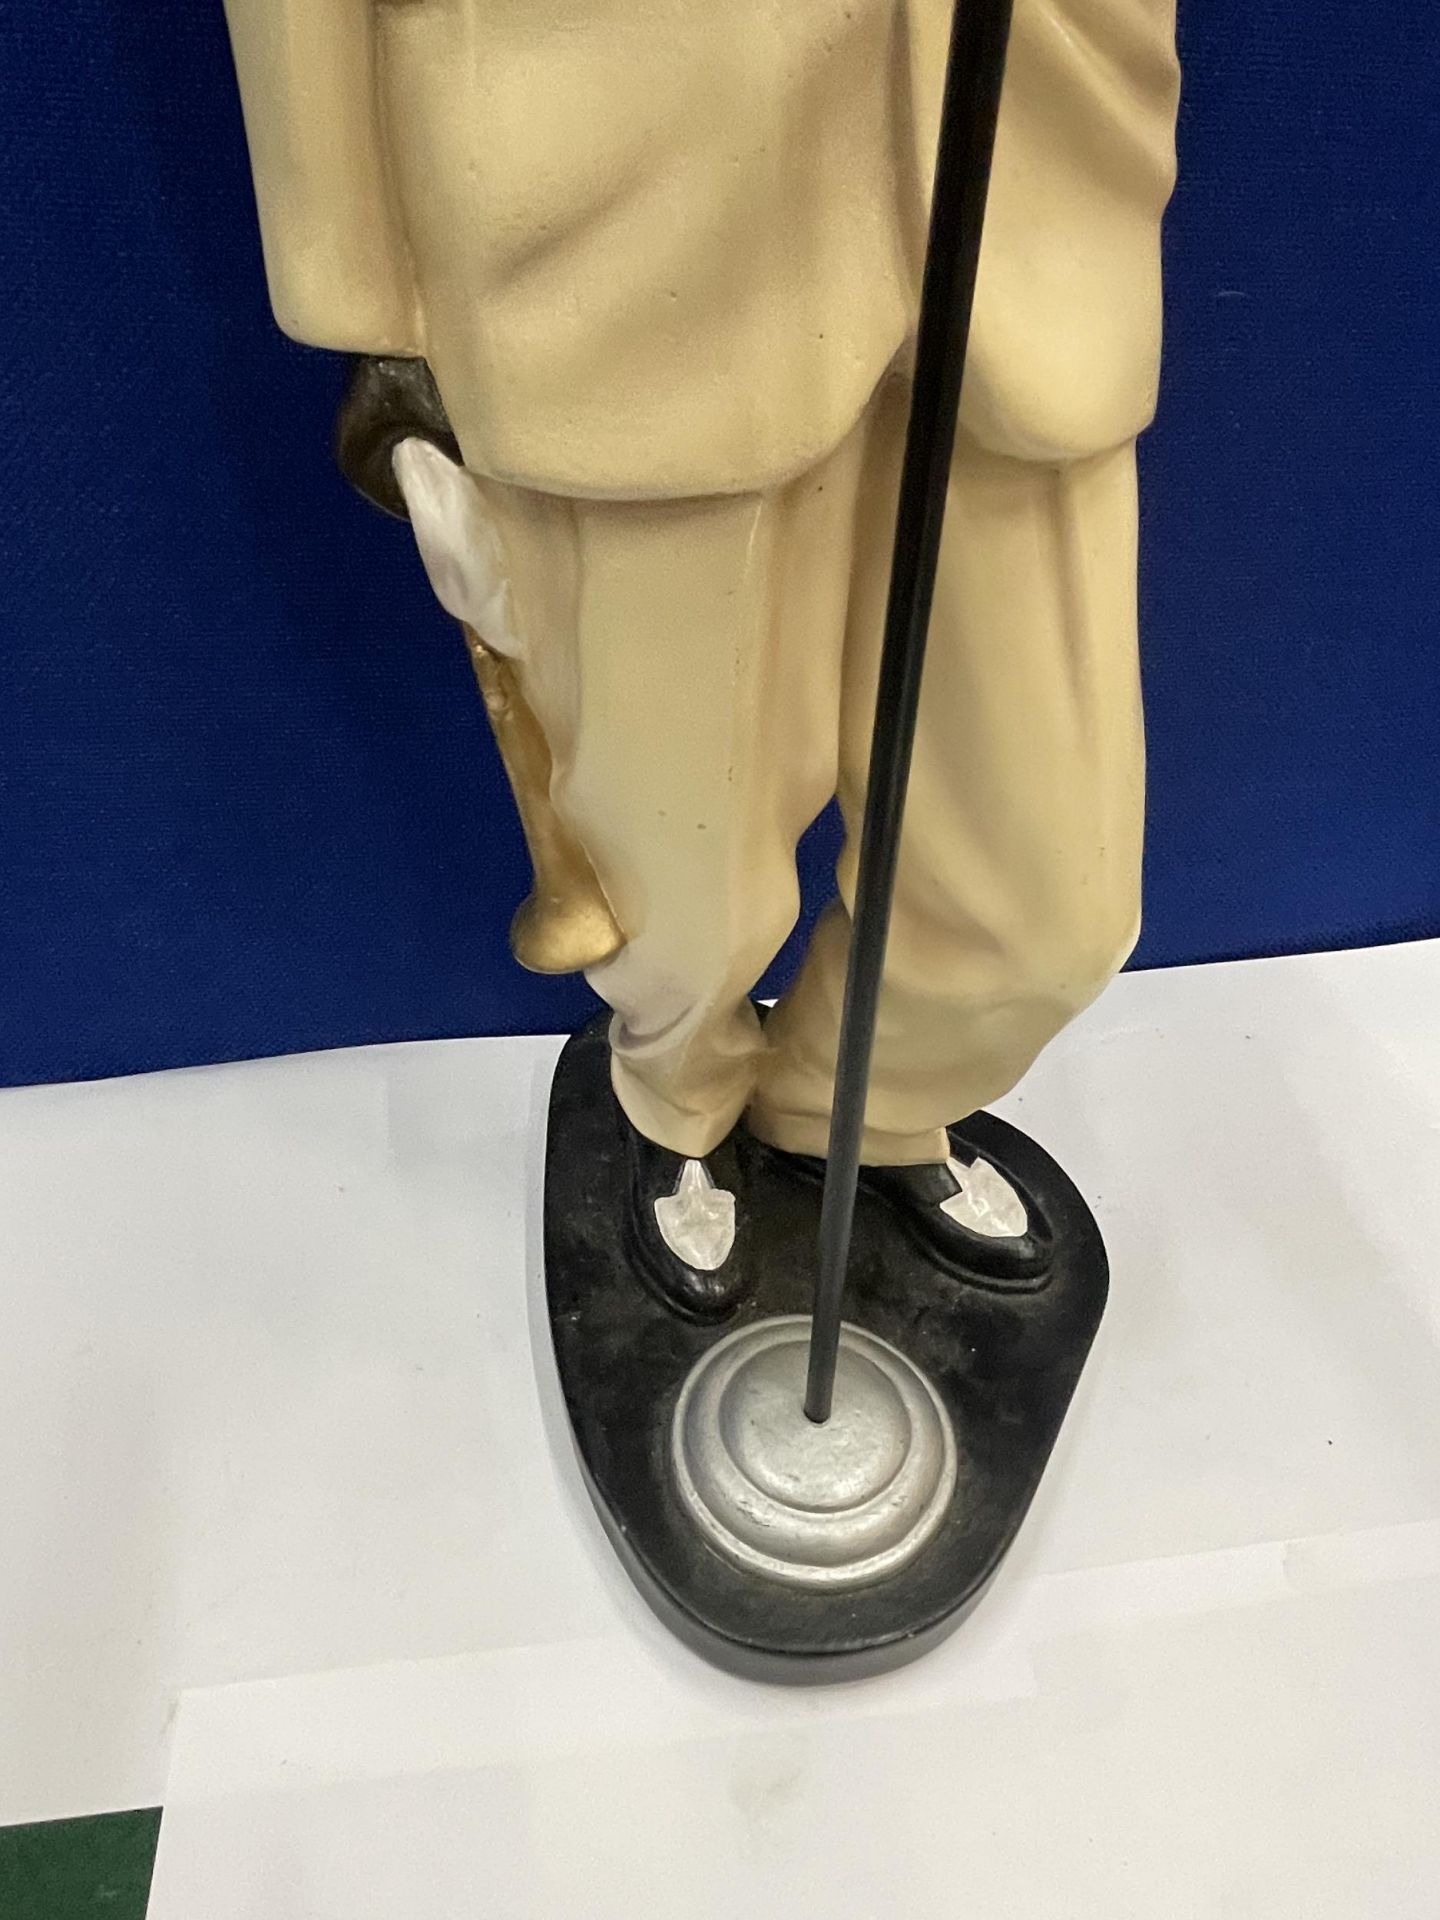 A HEAVY LOUIS ARMSTRONG FIGURE WITH TRUMPET AND MICROPHONE 22 INCHES TALL - Image 4 of 4